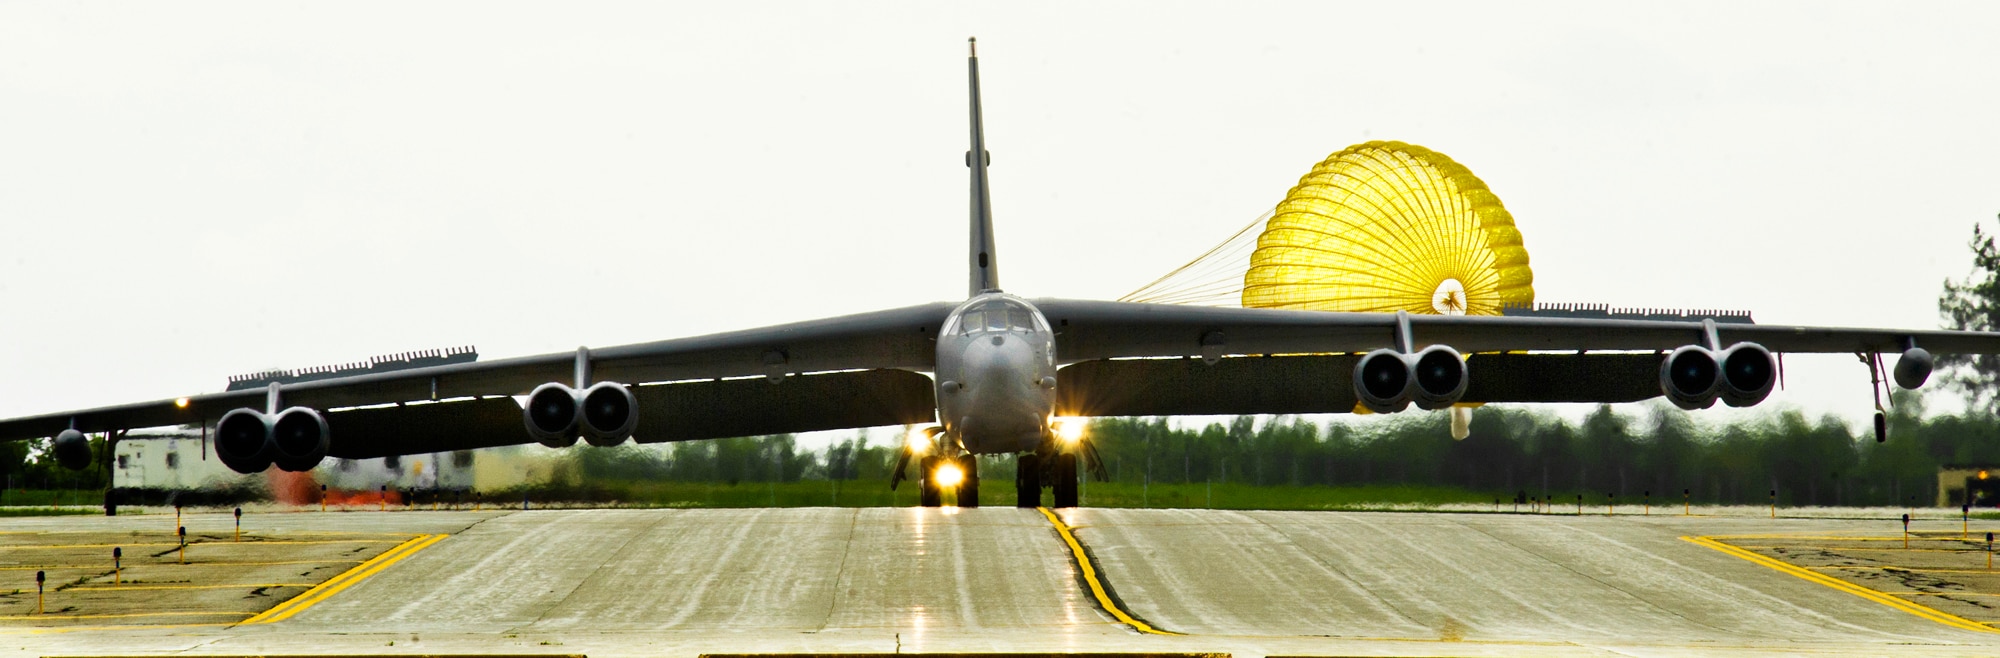 A B-52H Stratofortress deploys a parachute after landing at Minot Air Force Base, N.D., June 20, 2013.   For more than 40 years, the B-52H has been the backbone of the manned strategic bomber force for the United States. It is capable of dropping or launching the widest array of weapons in the U.S. inventory. (U.S. Air Force photo/Senior Airman Brittany Y. Auld)